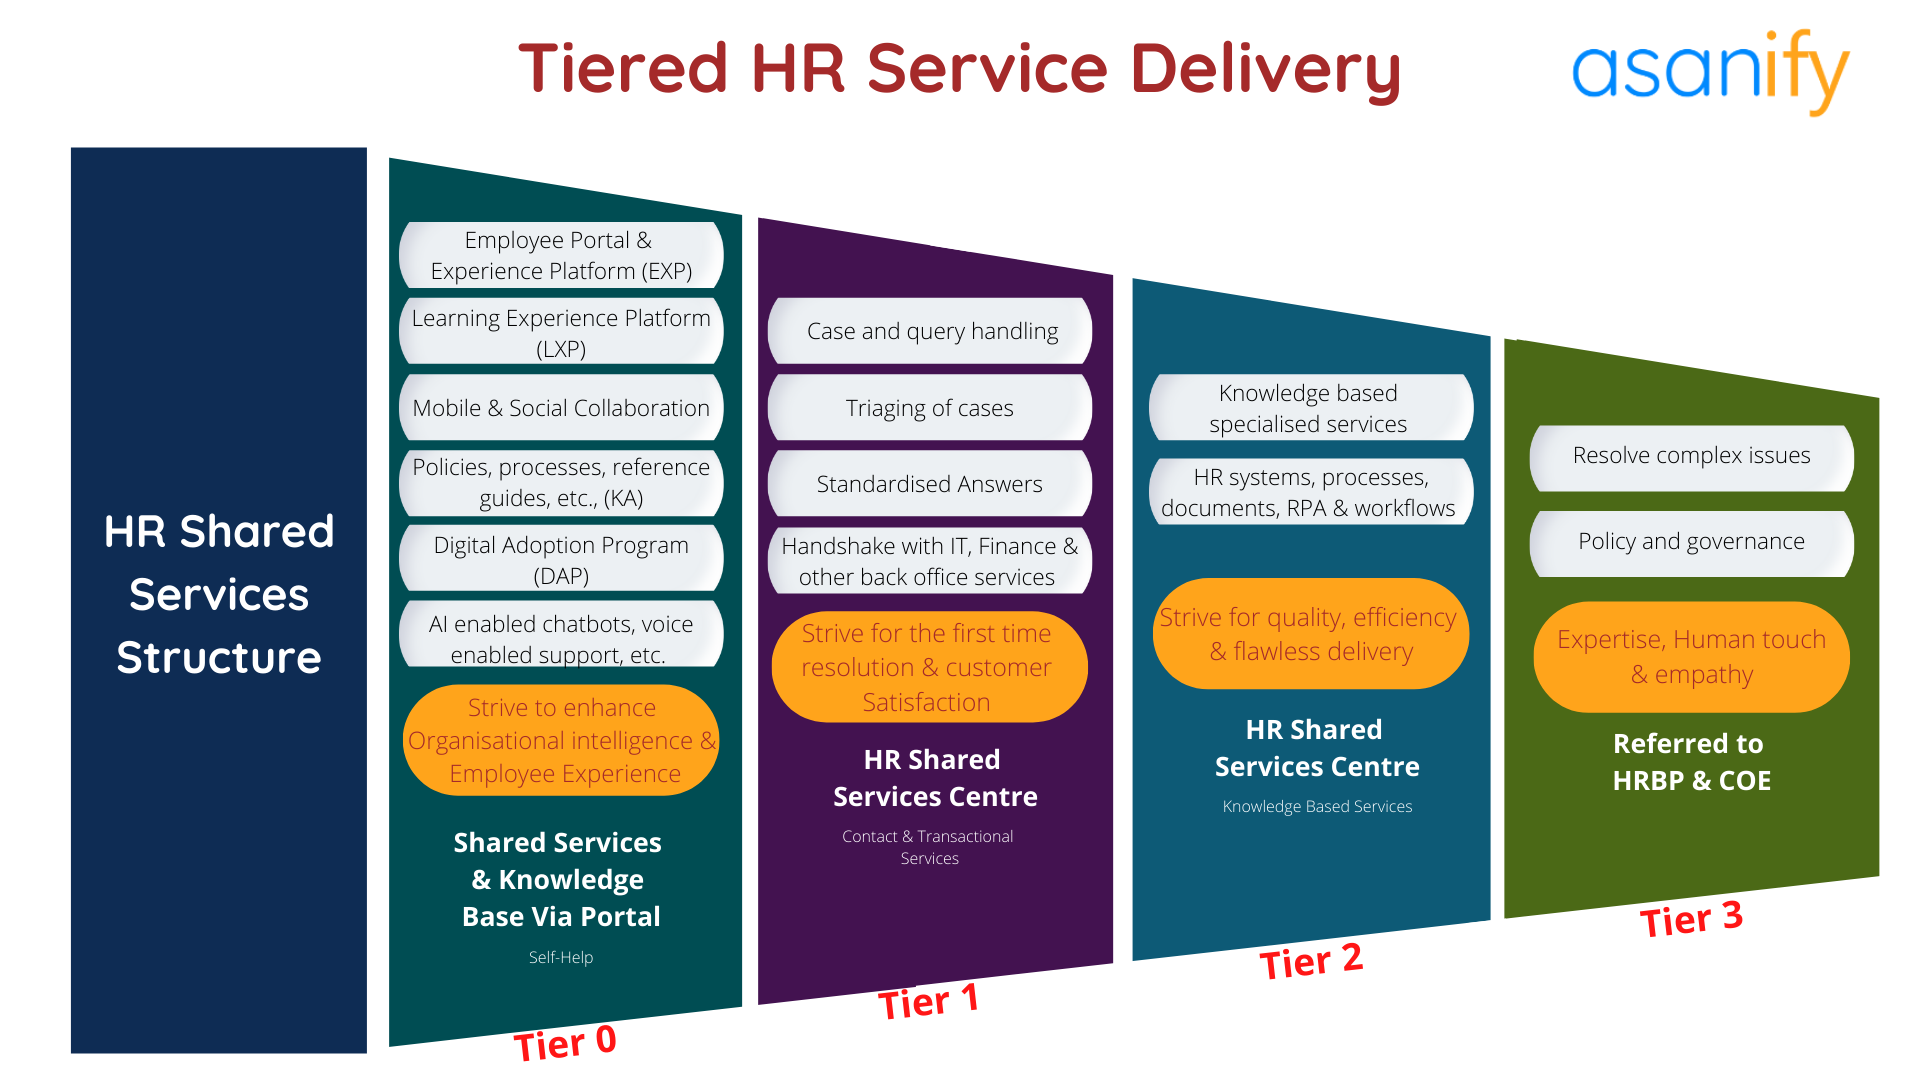 HR shared services structure